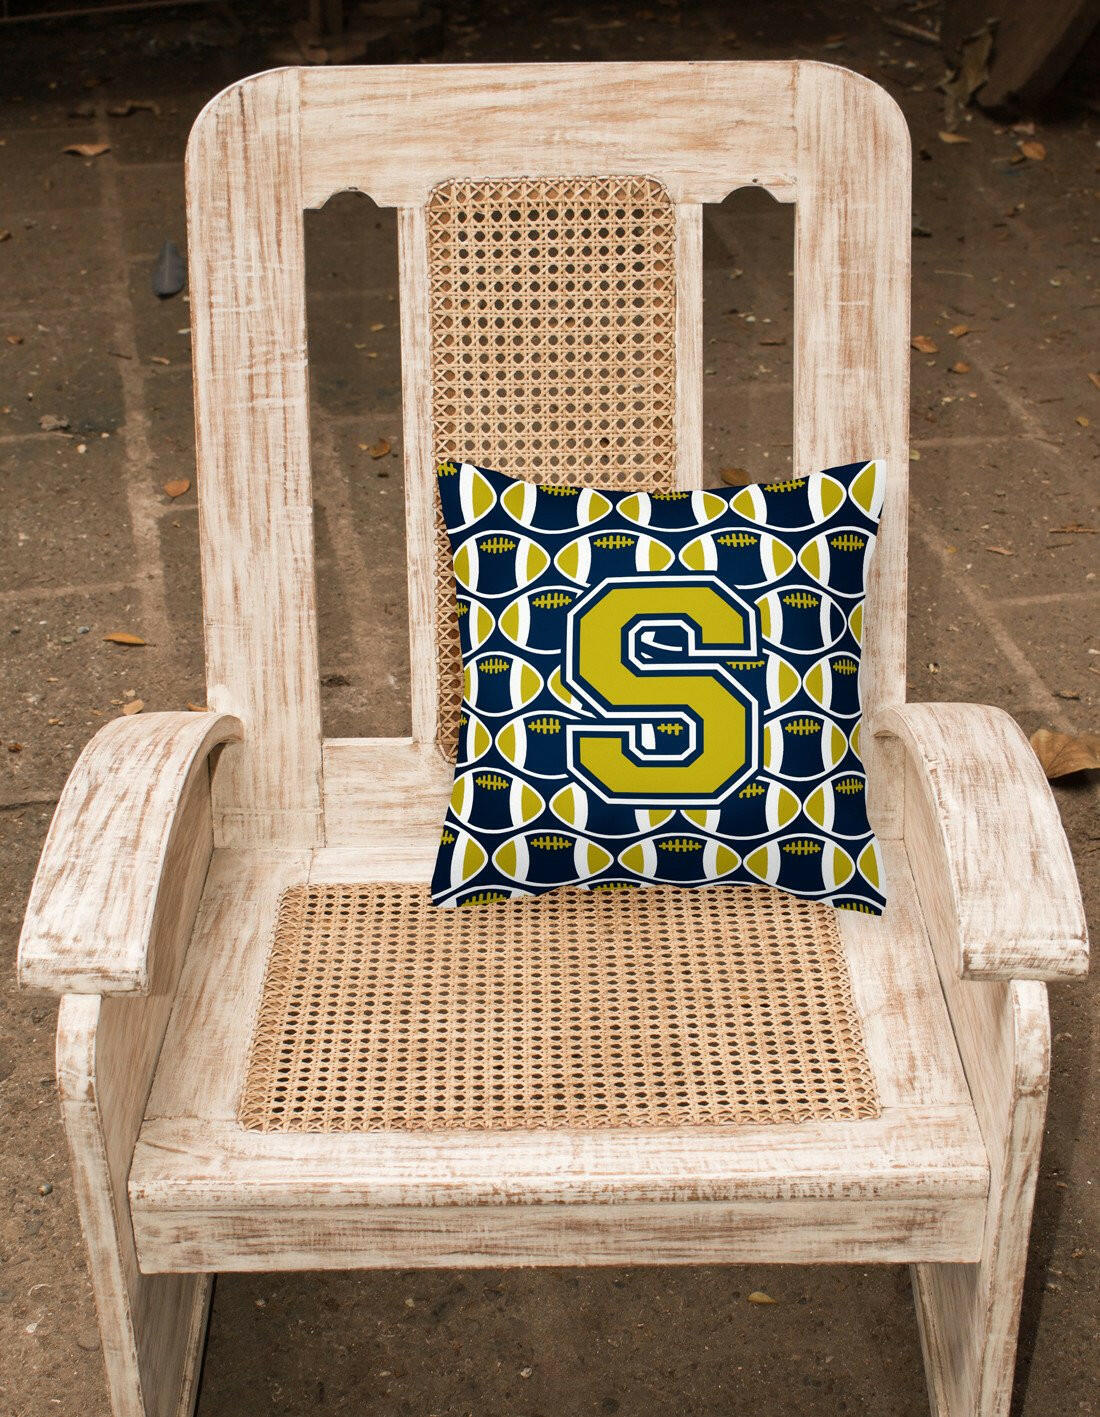 Letter S Football Blue and Gold Fabric Decorative Pillow CJ1074-SPW1414 by Caroline's Treasures